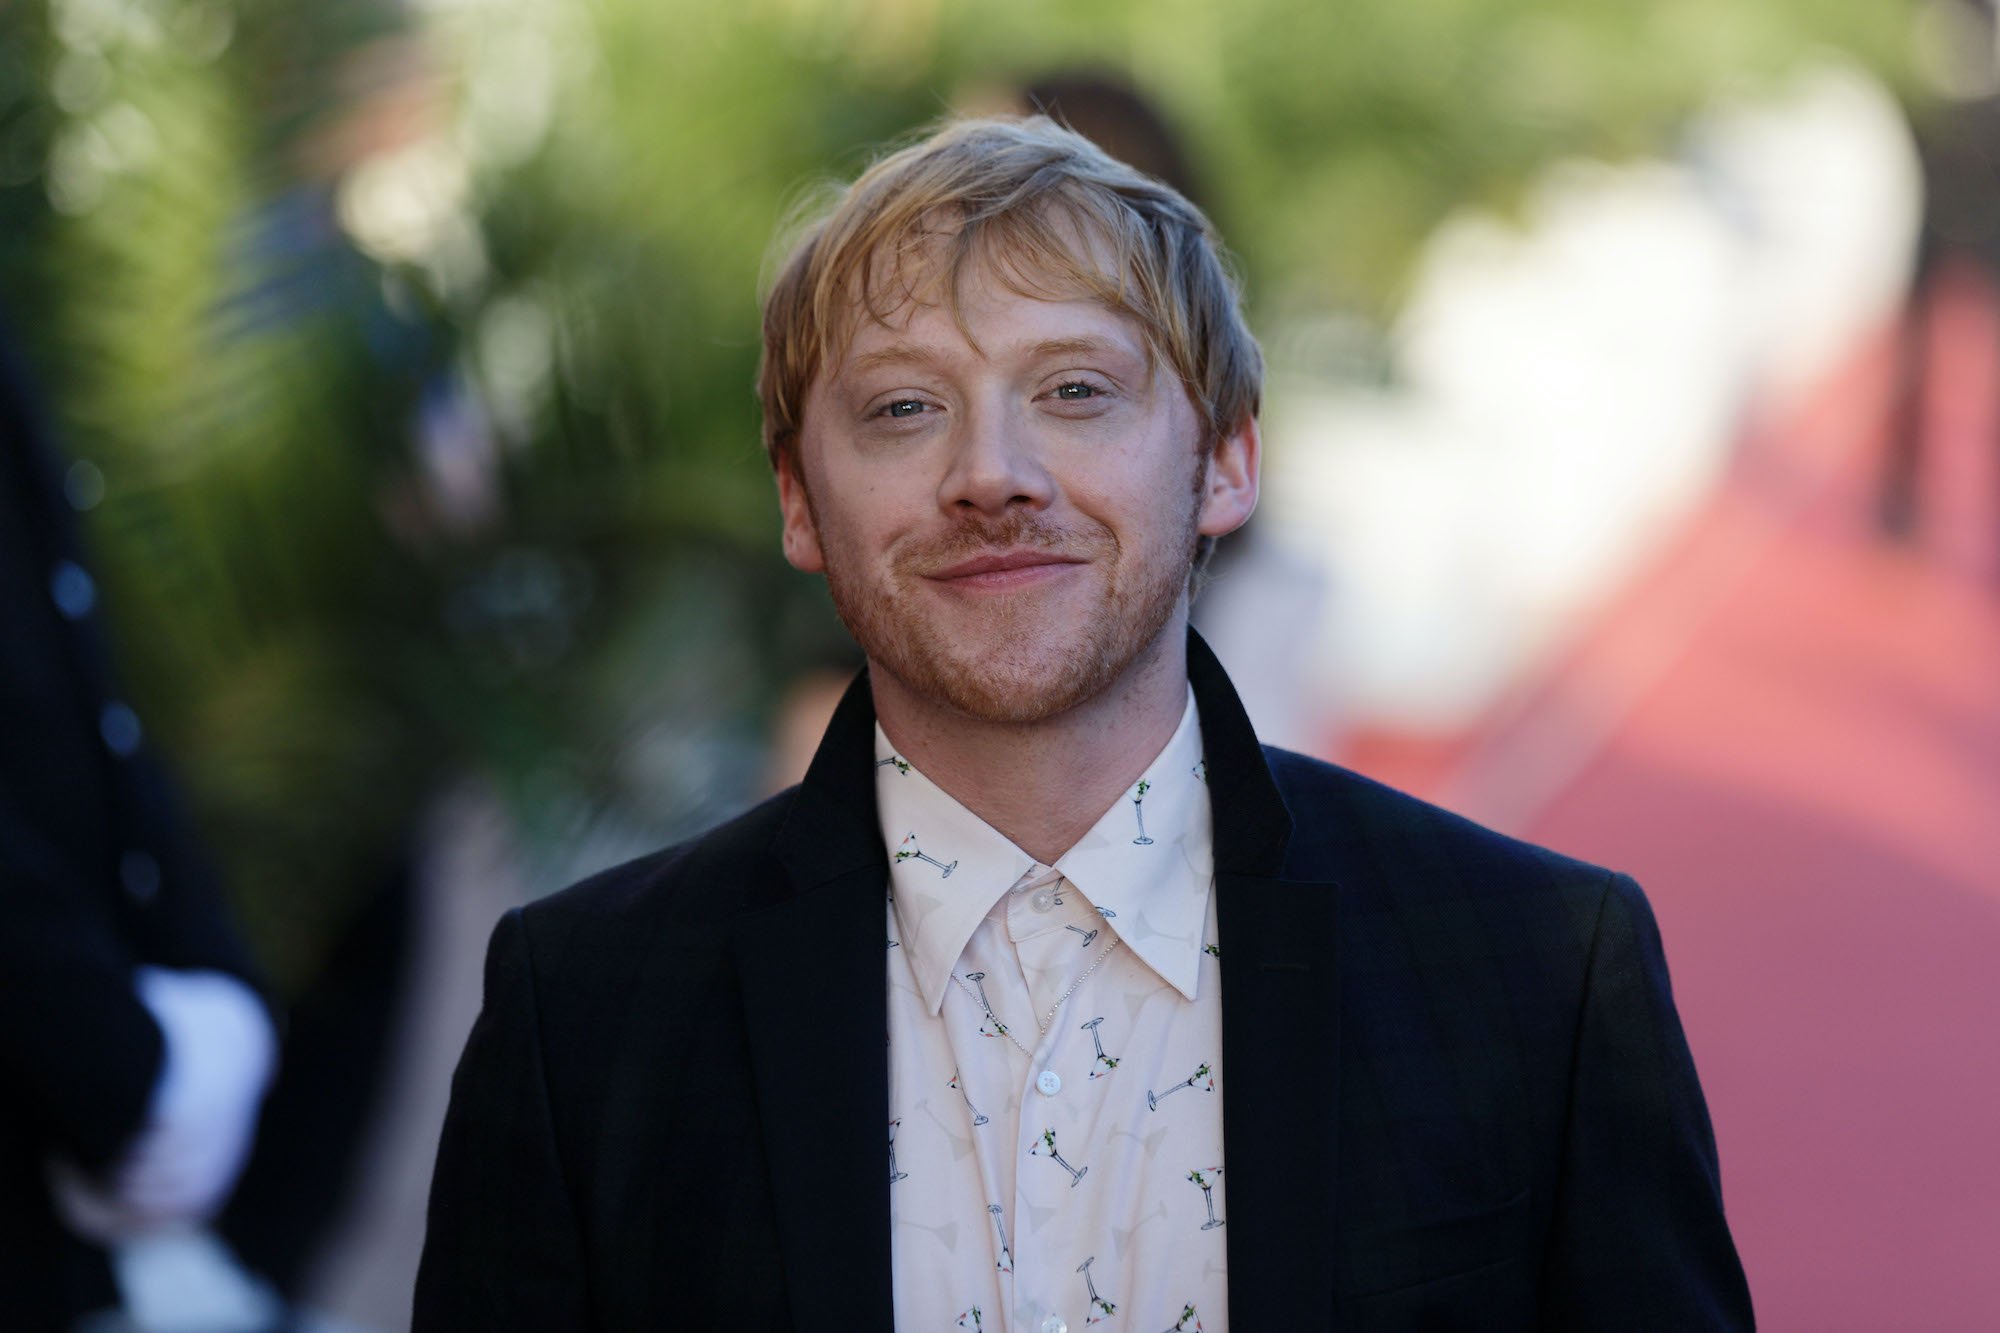 Rupert Grint Says the Pandemic Has Been a ‘Blessing in Disguise’ After the Birth of His Daughter, Wednesday